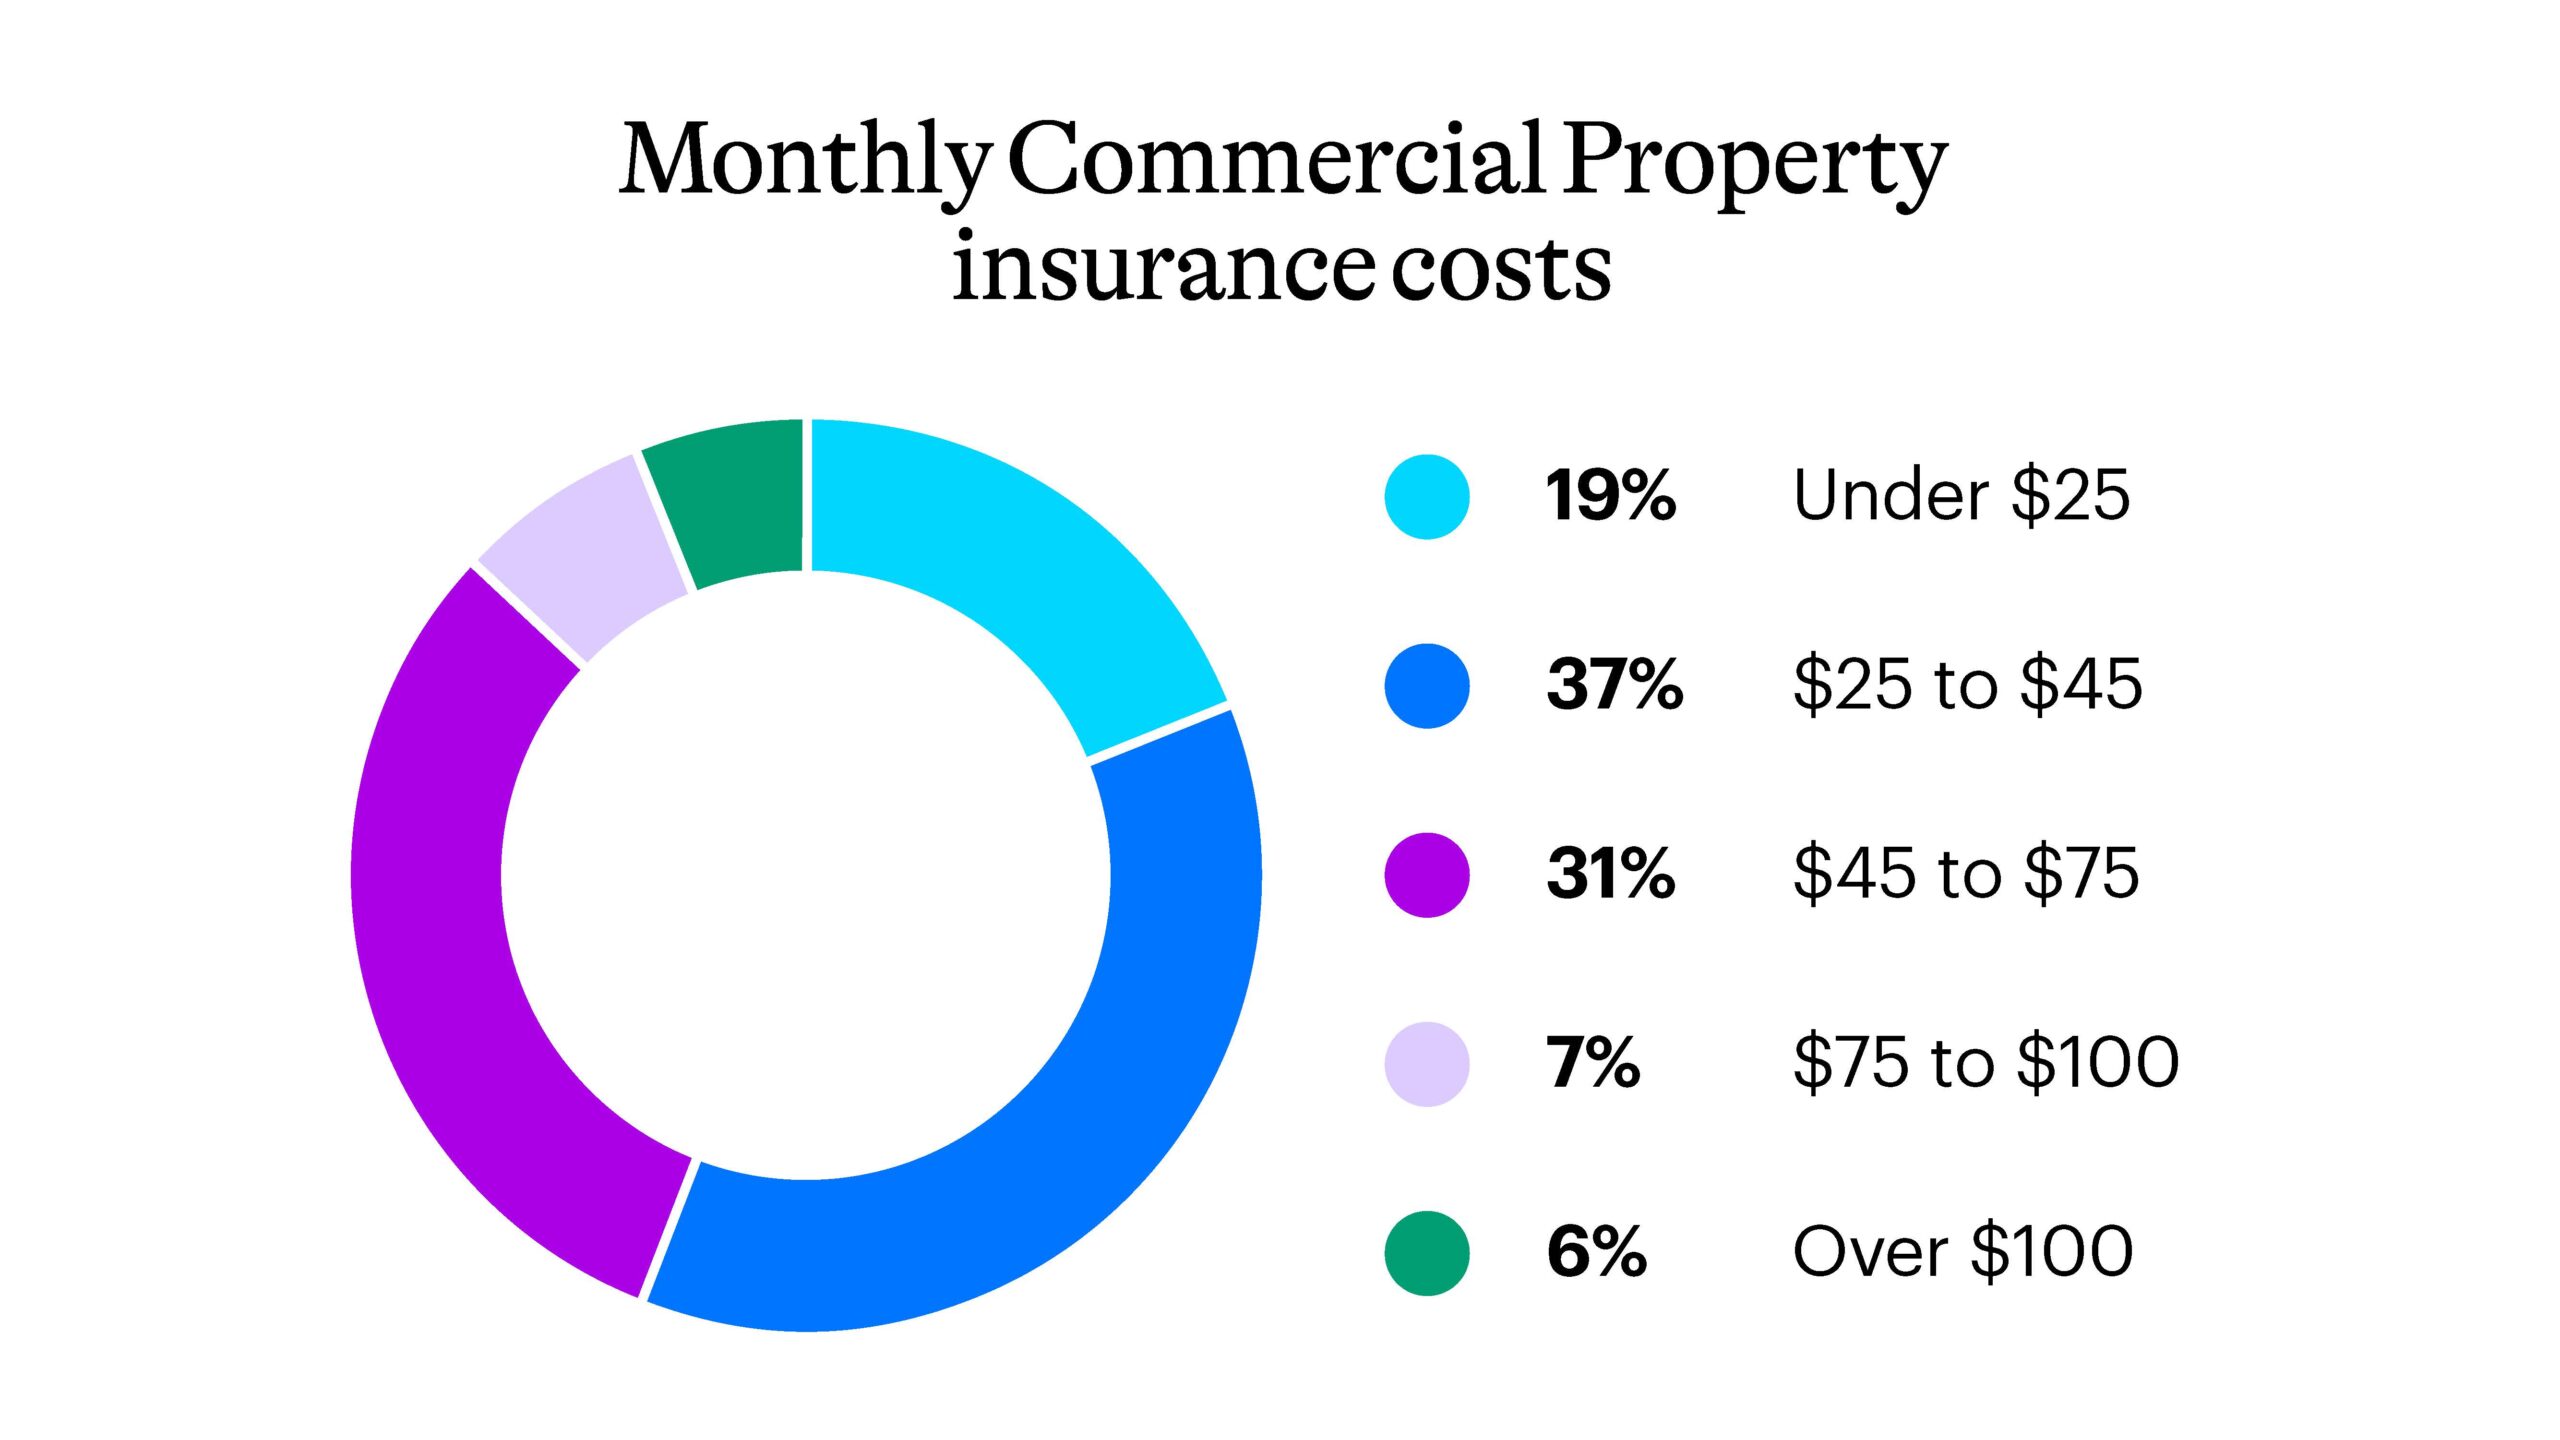 Monthly Commercial Property insurance costs